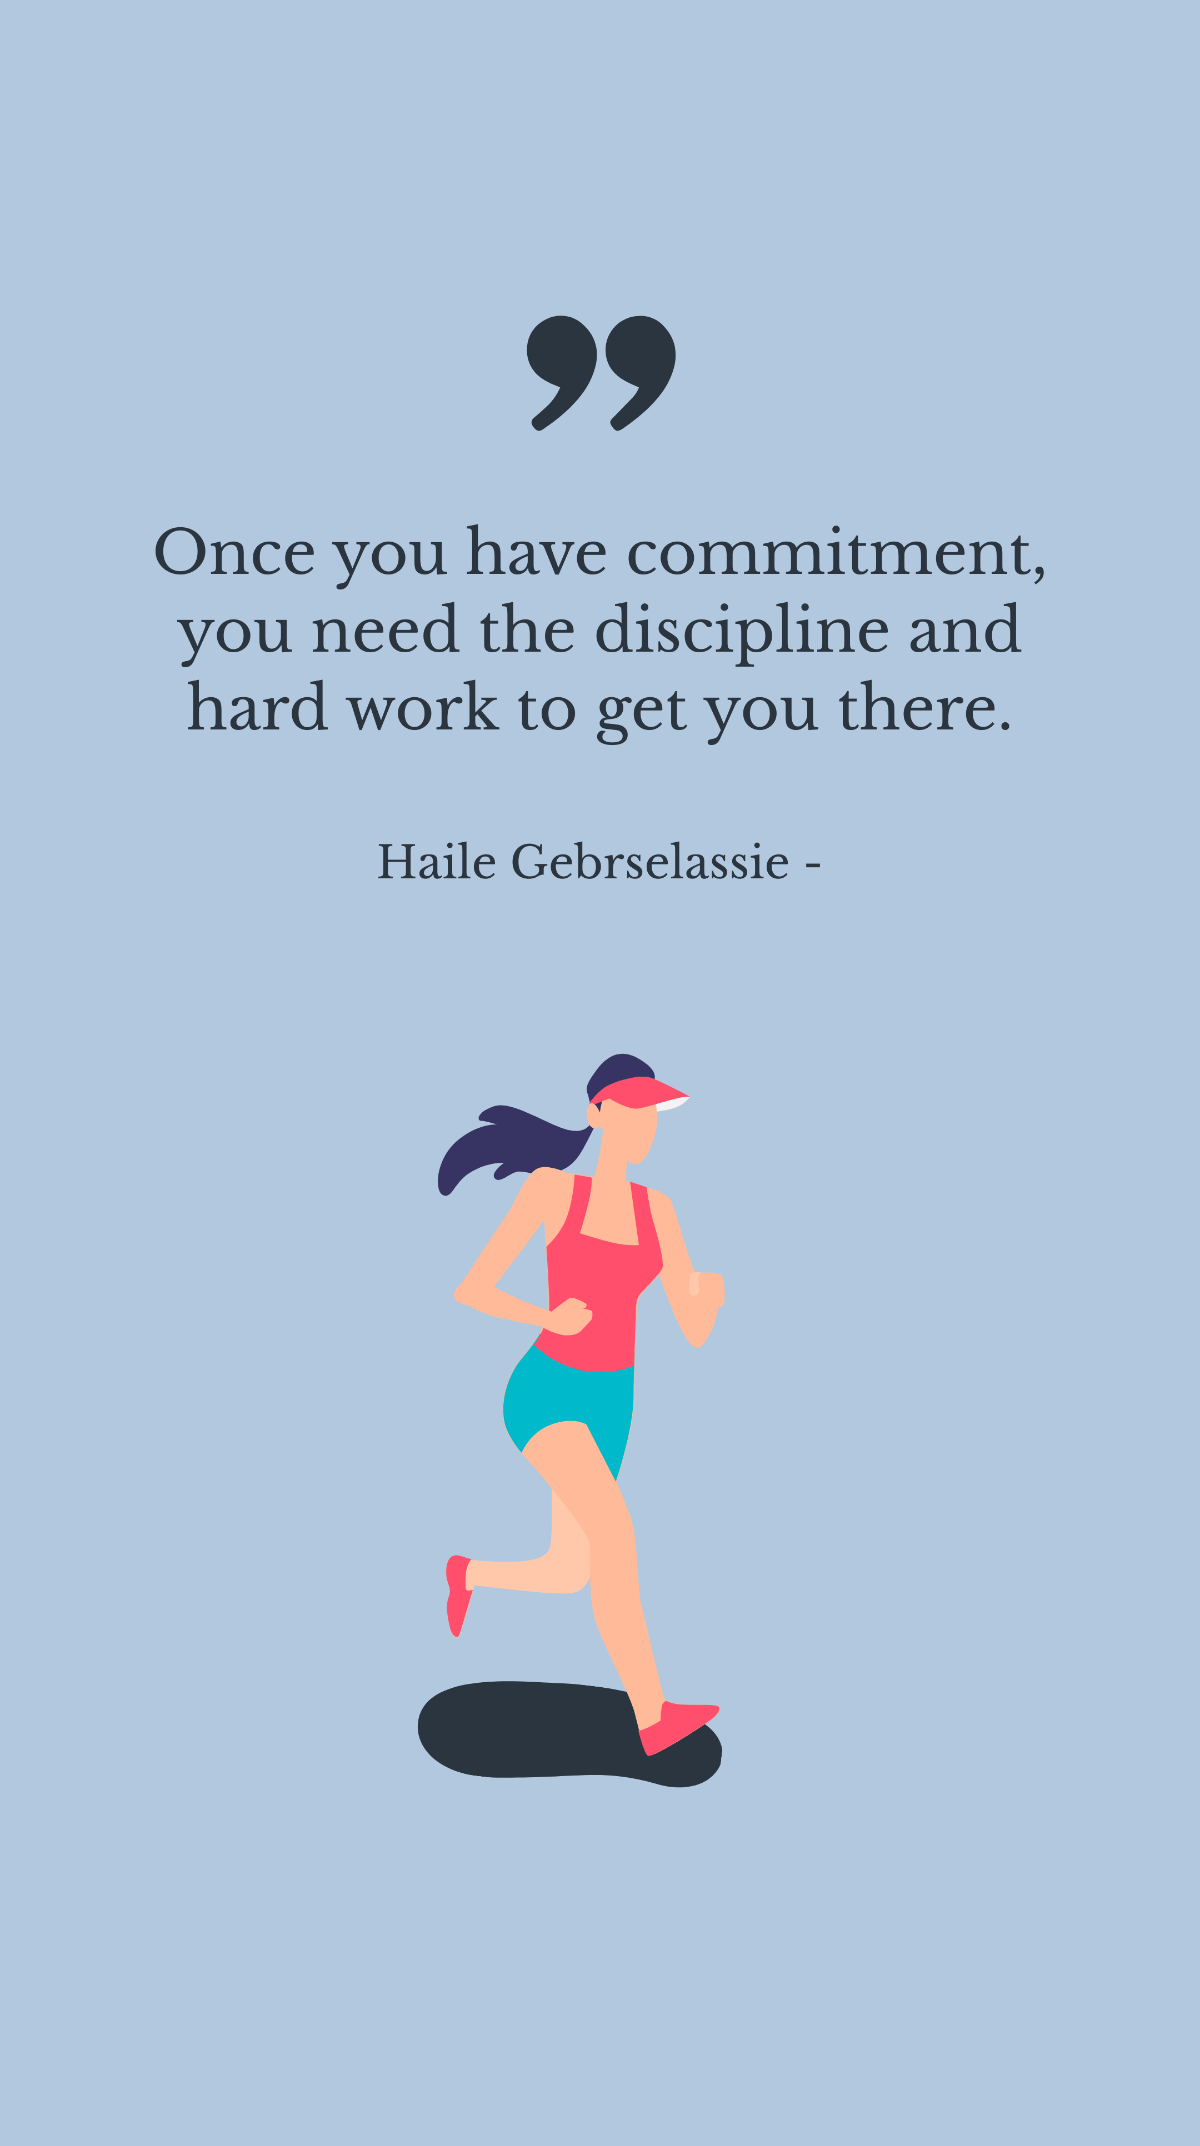 Haile Gebrselassie - Once you have commitment, you need the discipline and hard work to get you there.